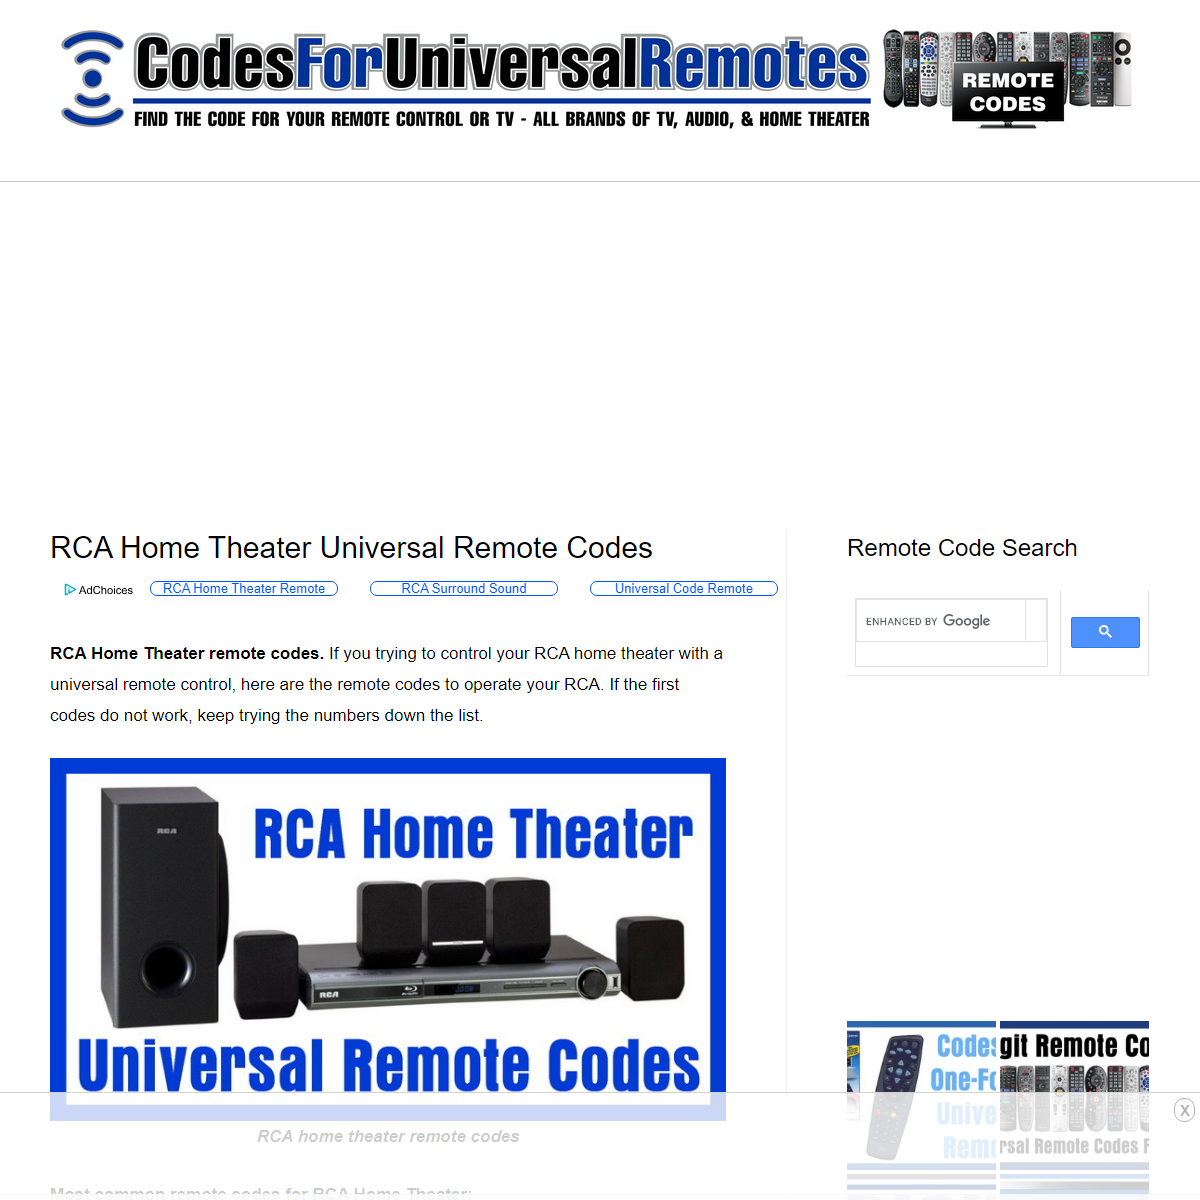 A complete backup of https://codesforuniversalremotes.com/rca-home-theater-universal-remote-codes/